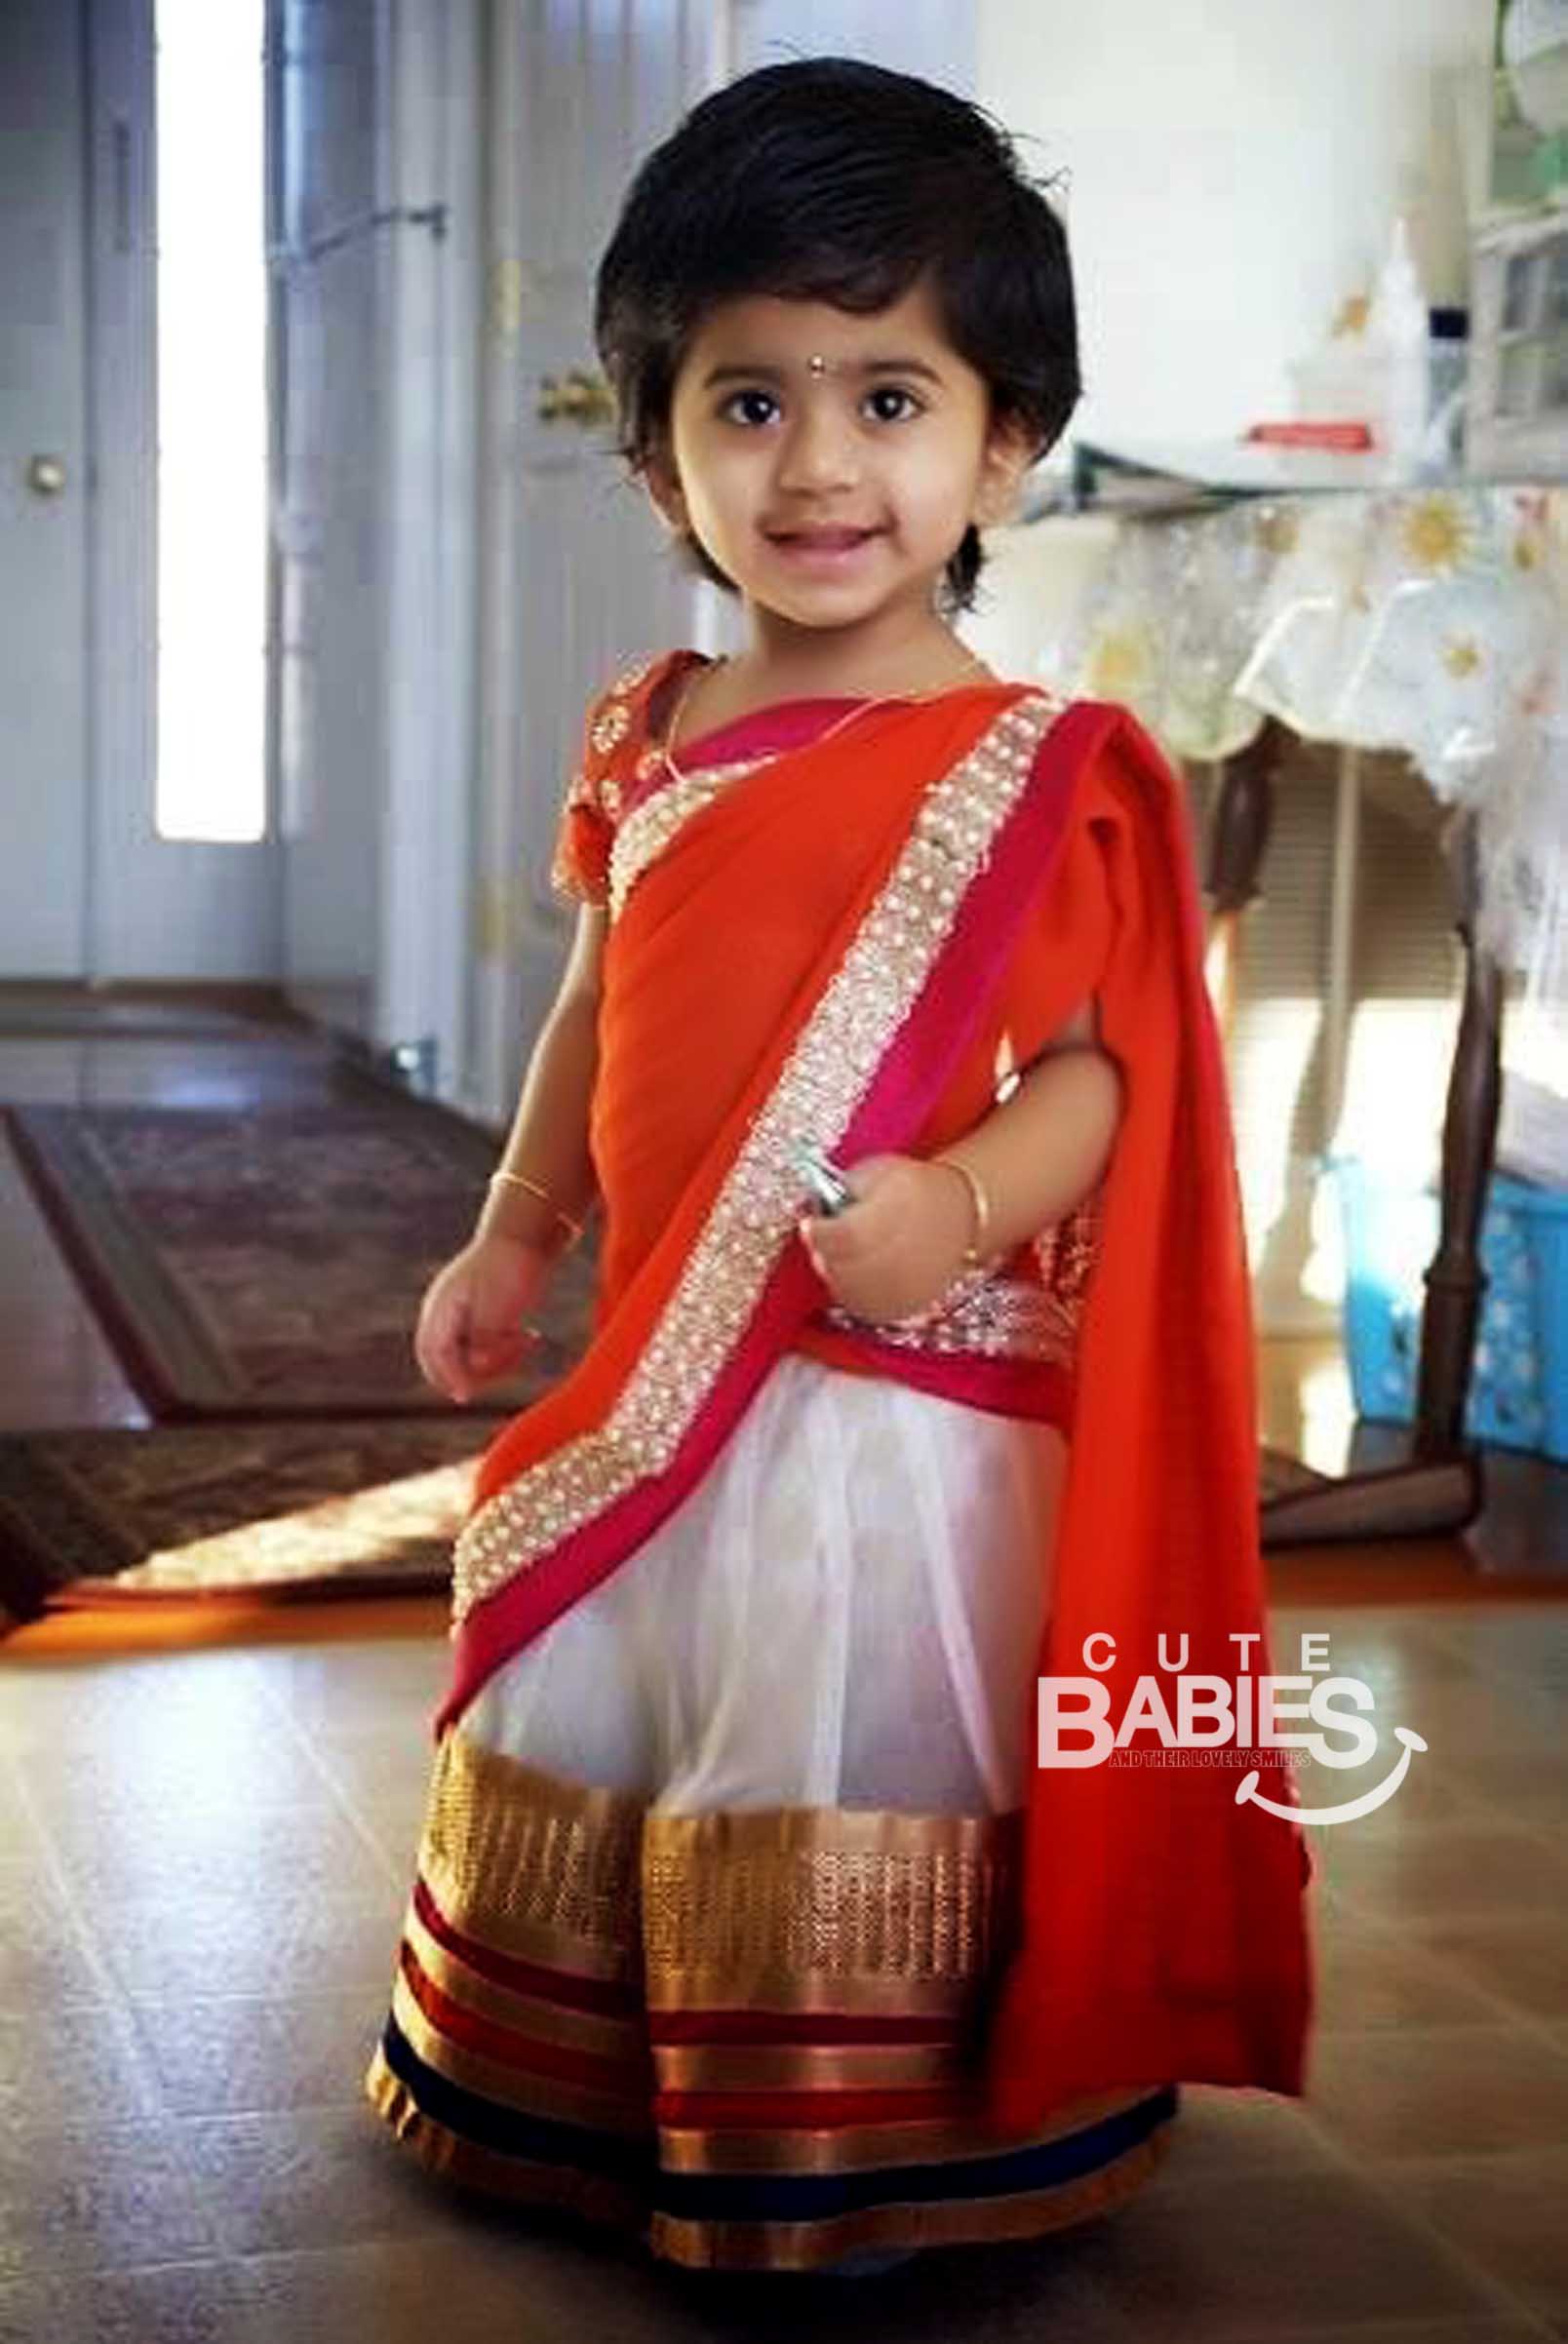 Some Cute Indian Baby Girls 15 Images - My Baby Smiles